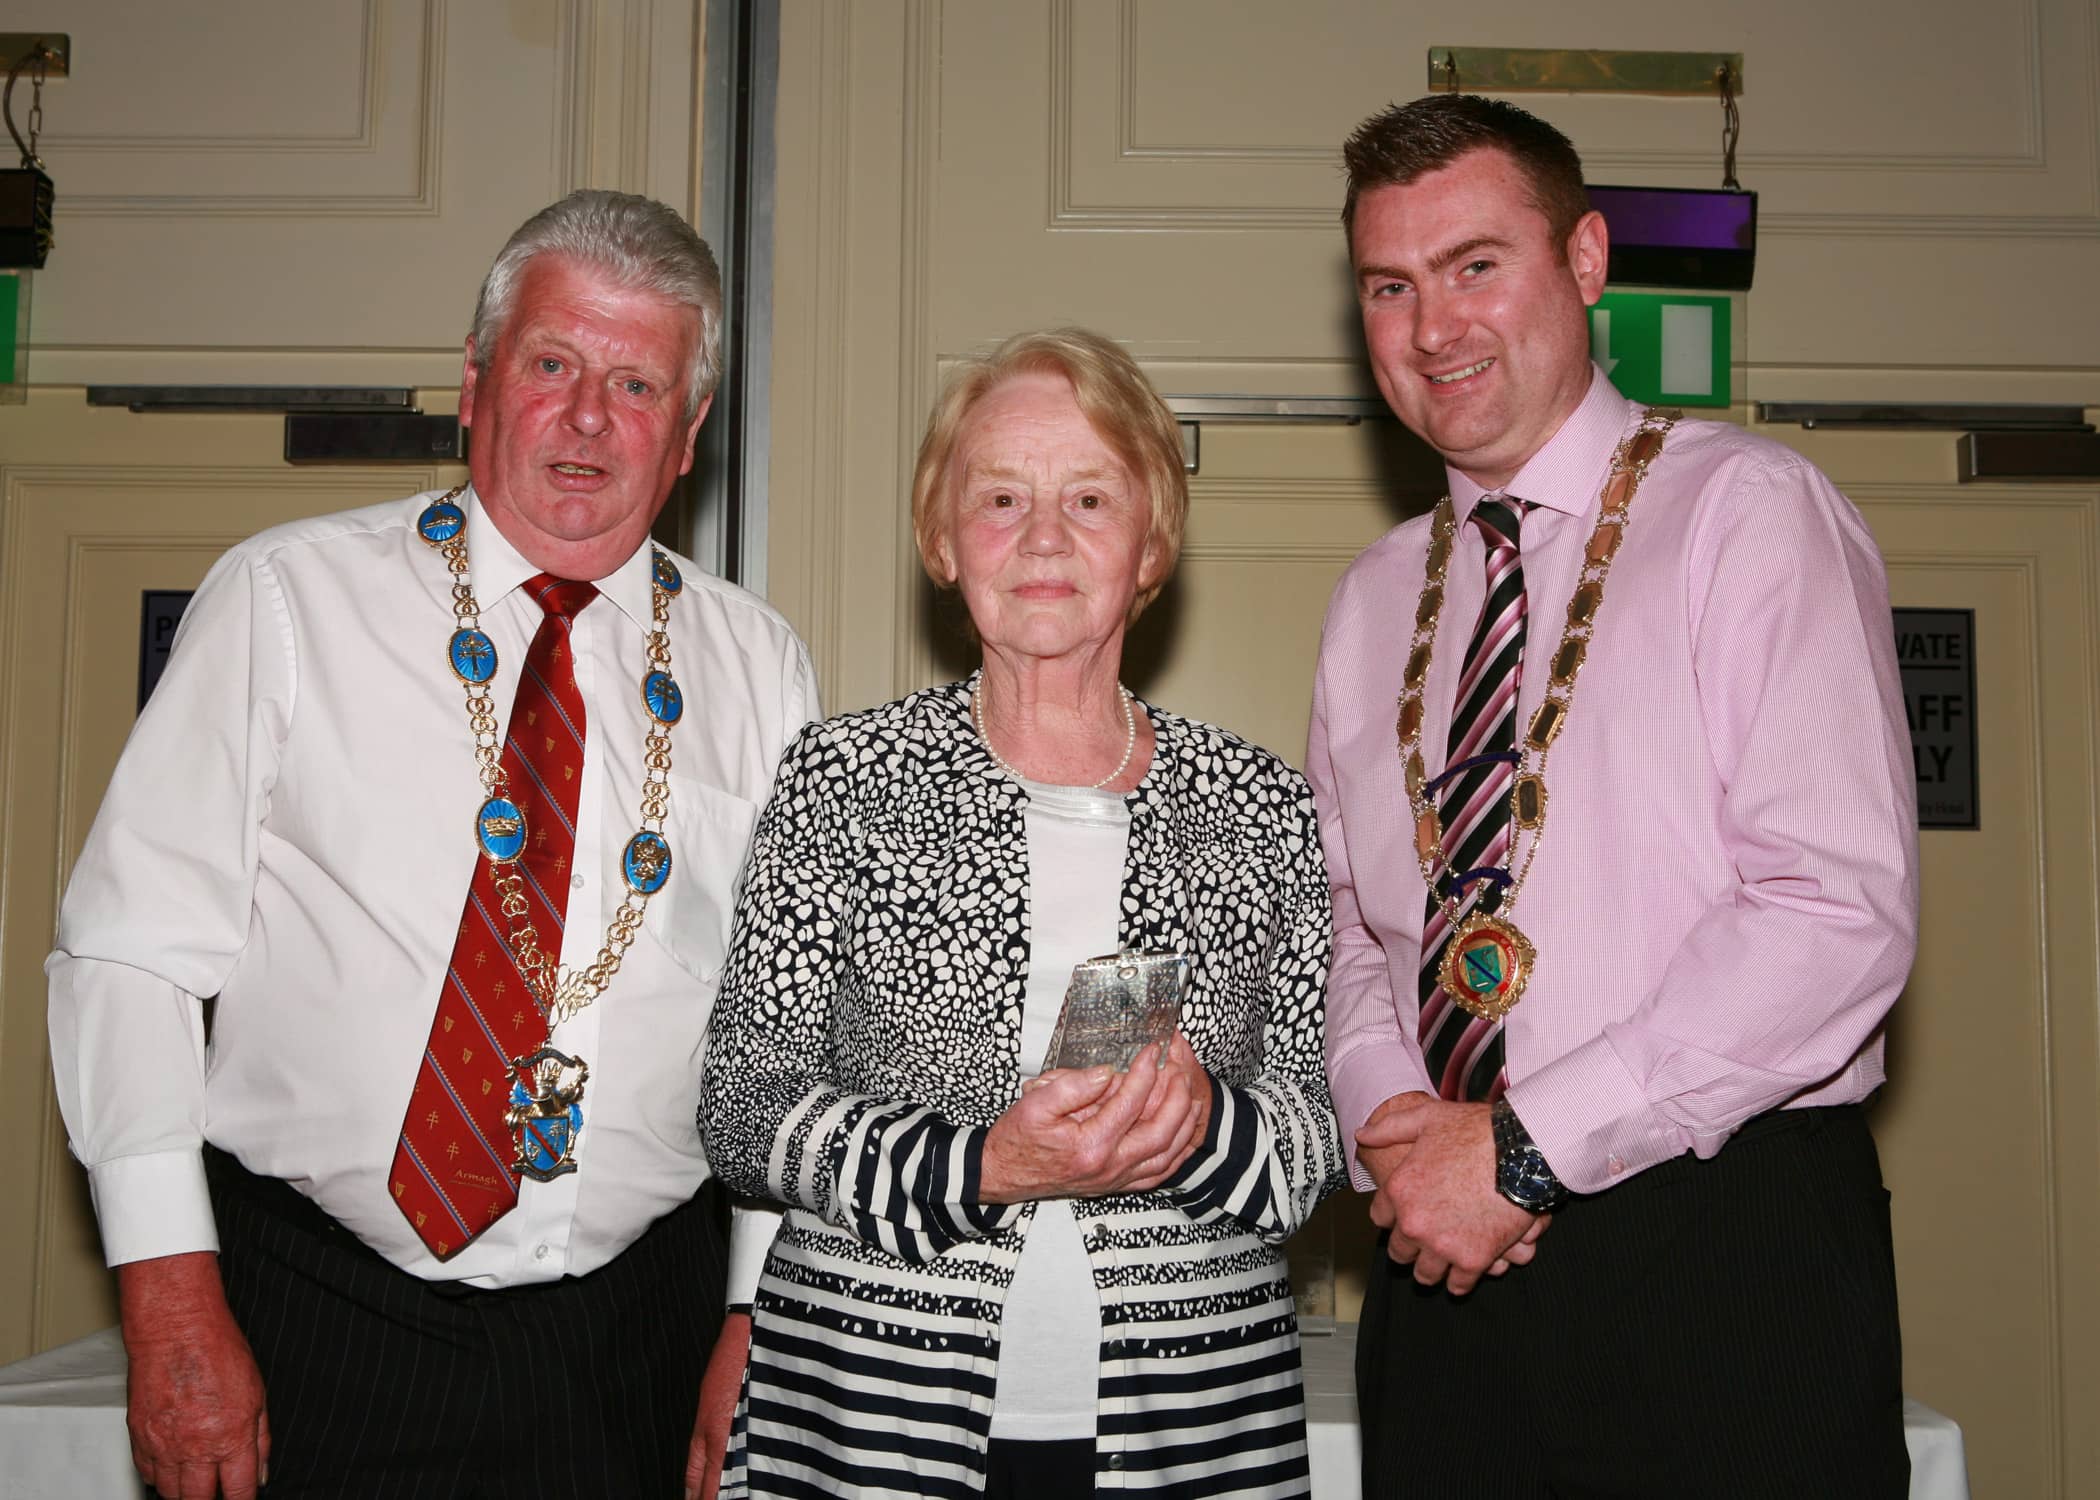 Lord and Deputy Lord Mayor presents Anne McArdle with Volunteer of the Year